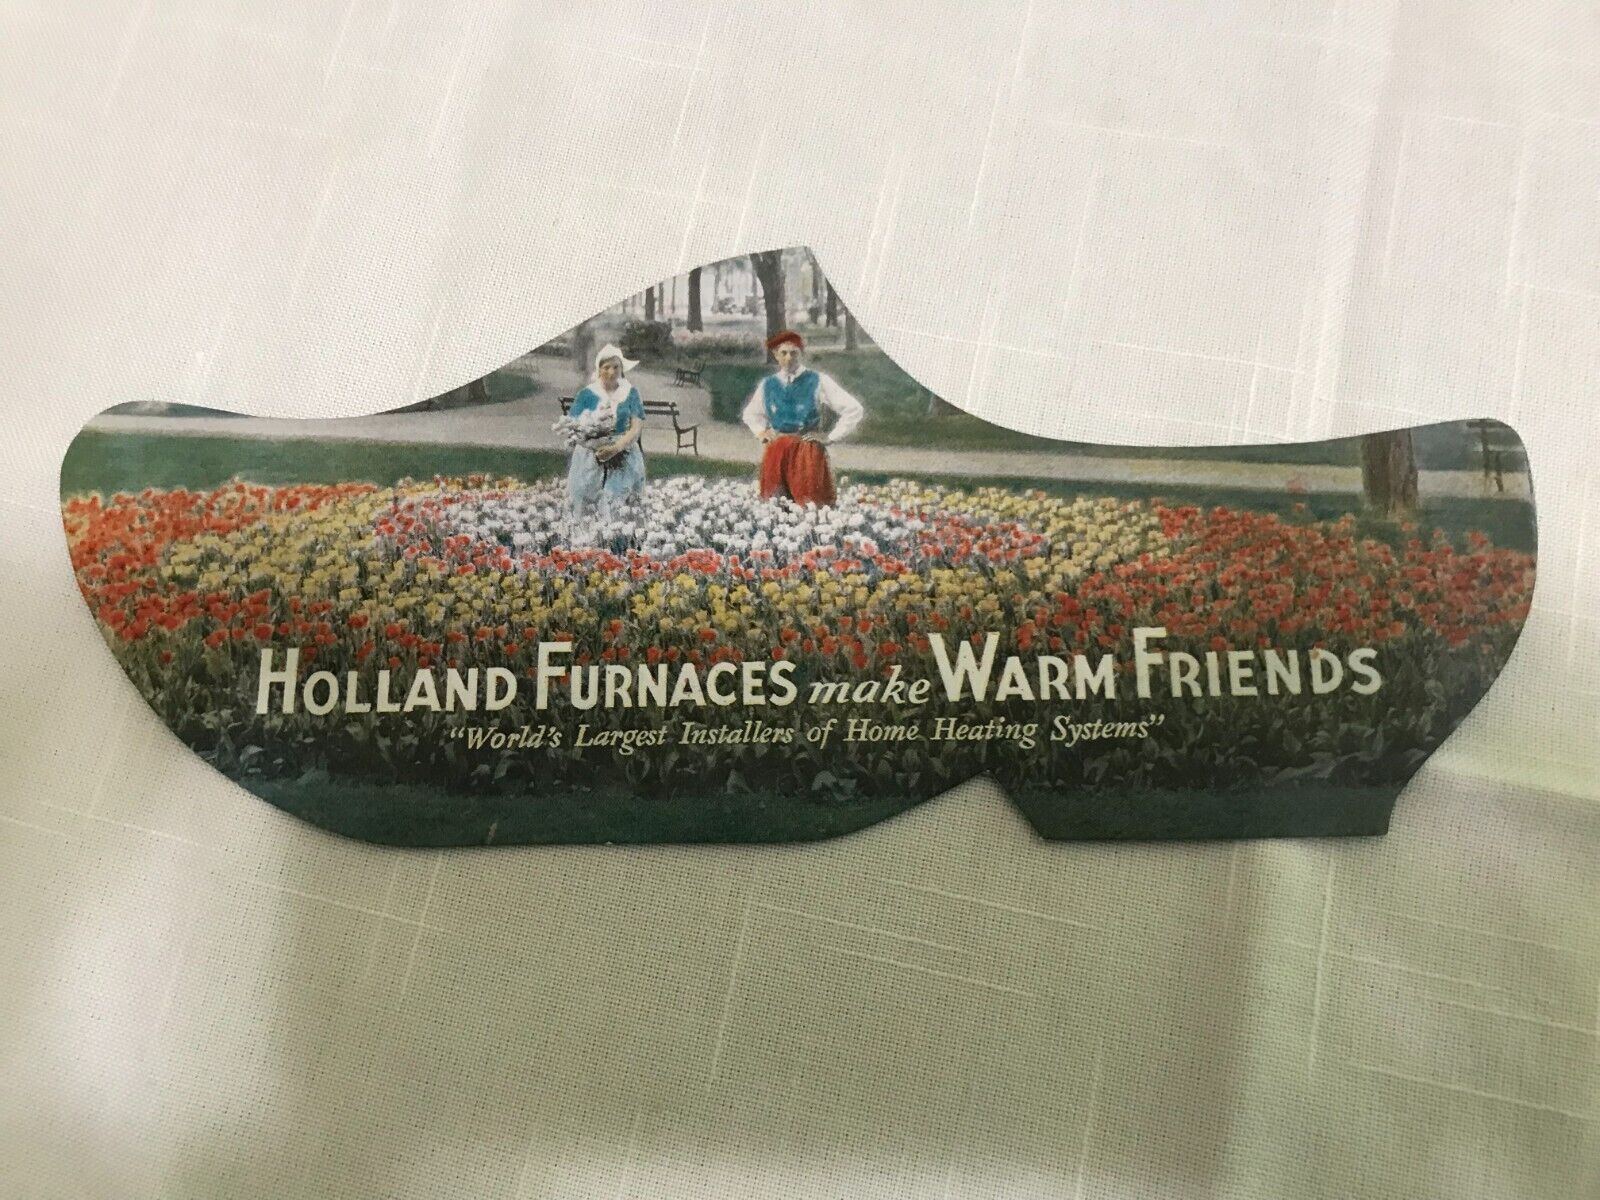 Vintage Advertising HOLLAND FURNACE CO. Holland Michigan TULIP TIME WOODEN SHOE